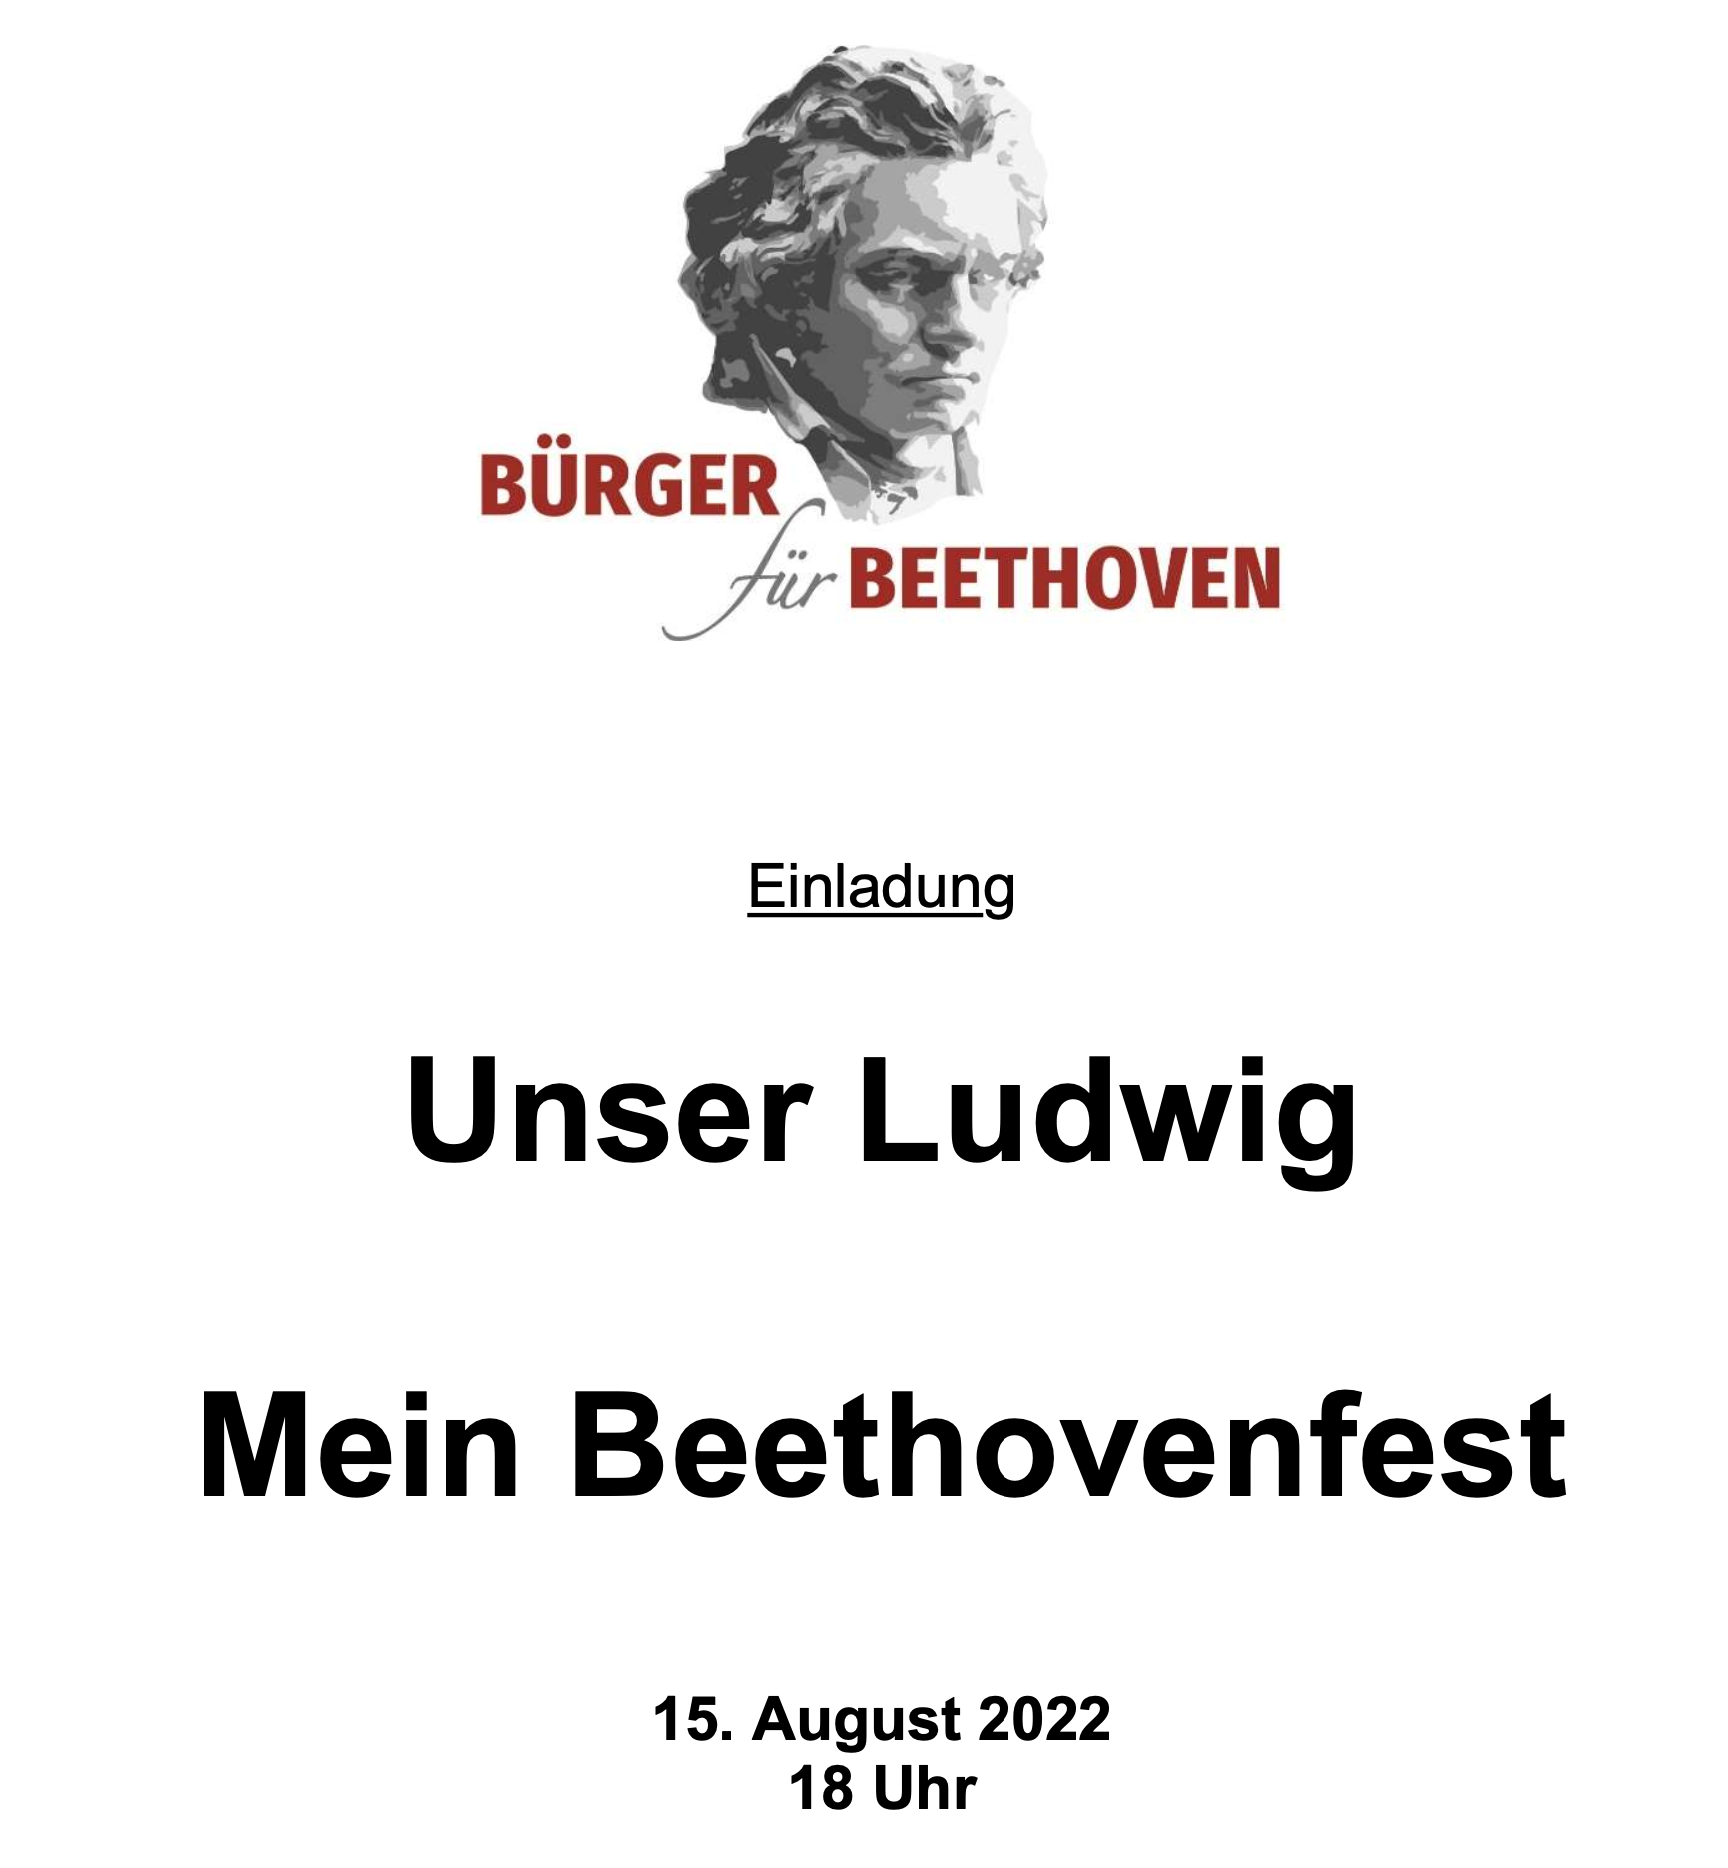 UNSER LUDWIG - MEIN BEETHOVENFEST IST am 15. August